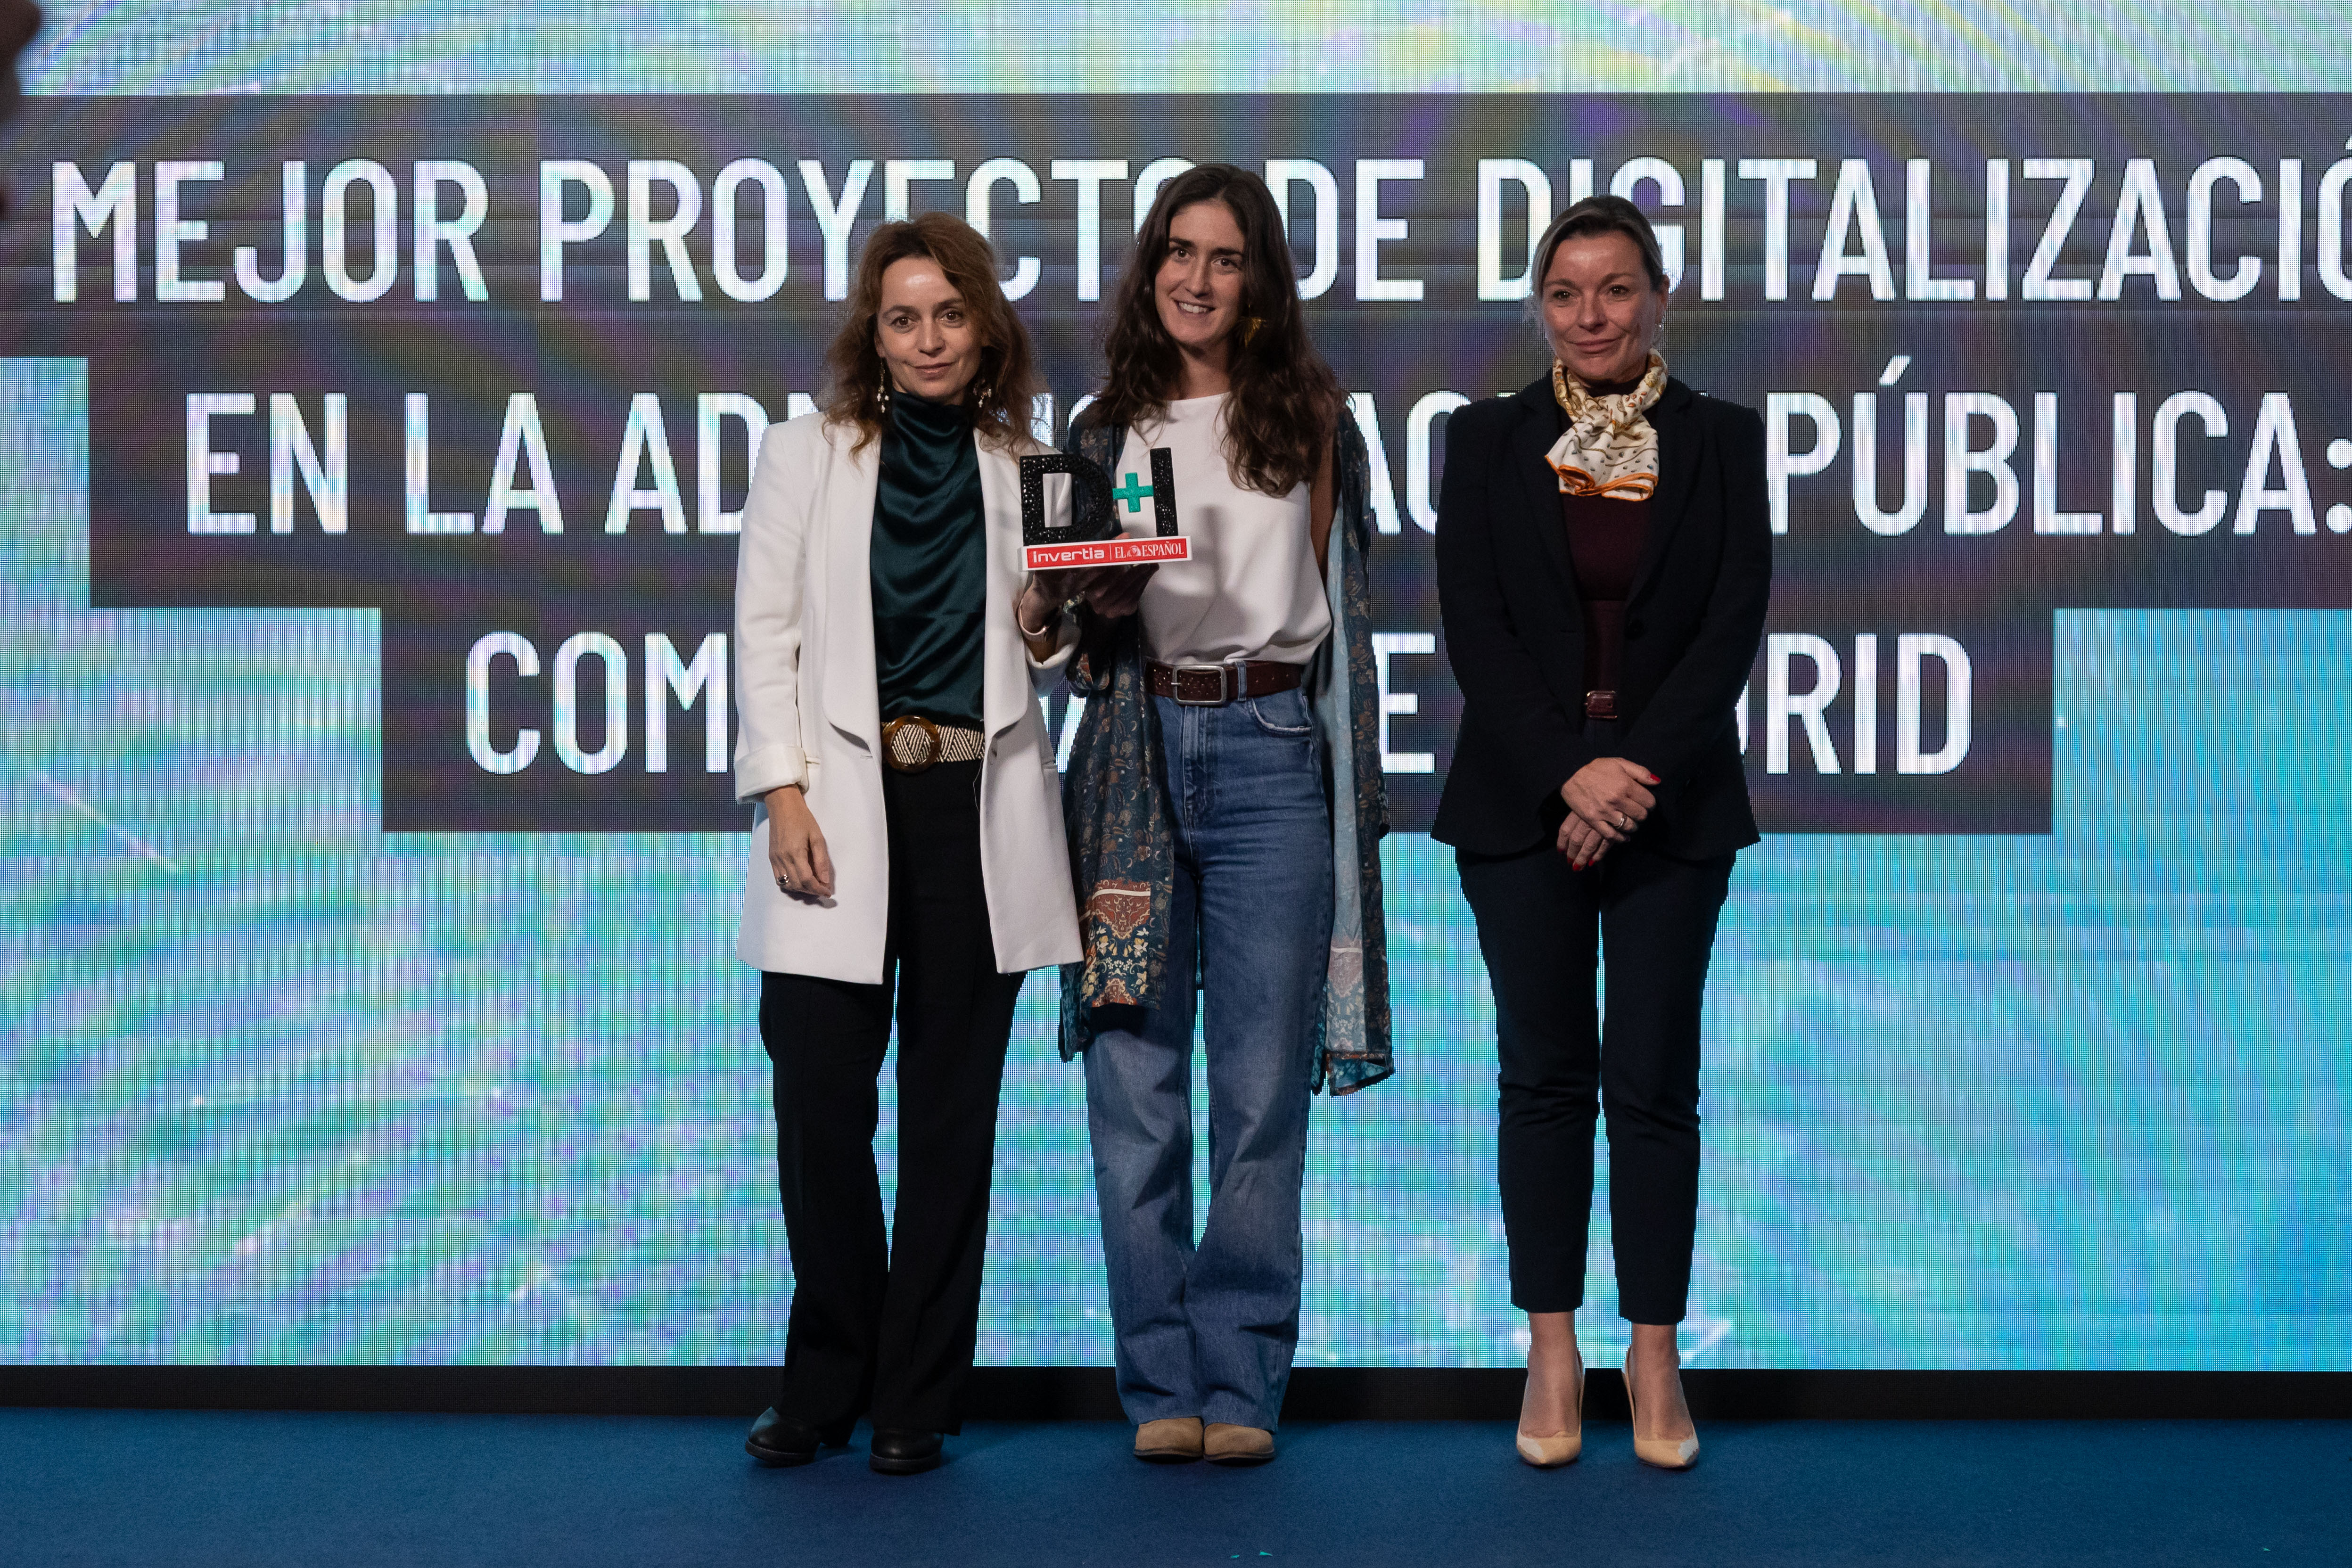 Ana Ramírez de Molina, Vice-counselor of Universities, Research and Science of the Community of Madrid, and Laura Ortiz, UPM representative and member of the Information and Quantum Computing Research Group.